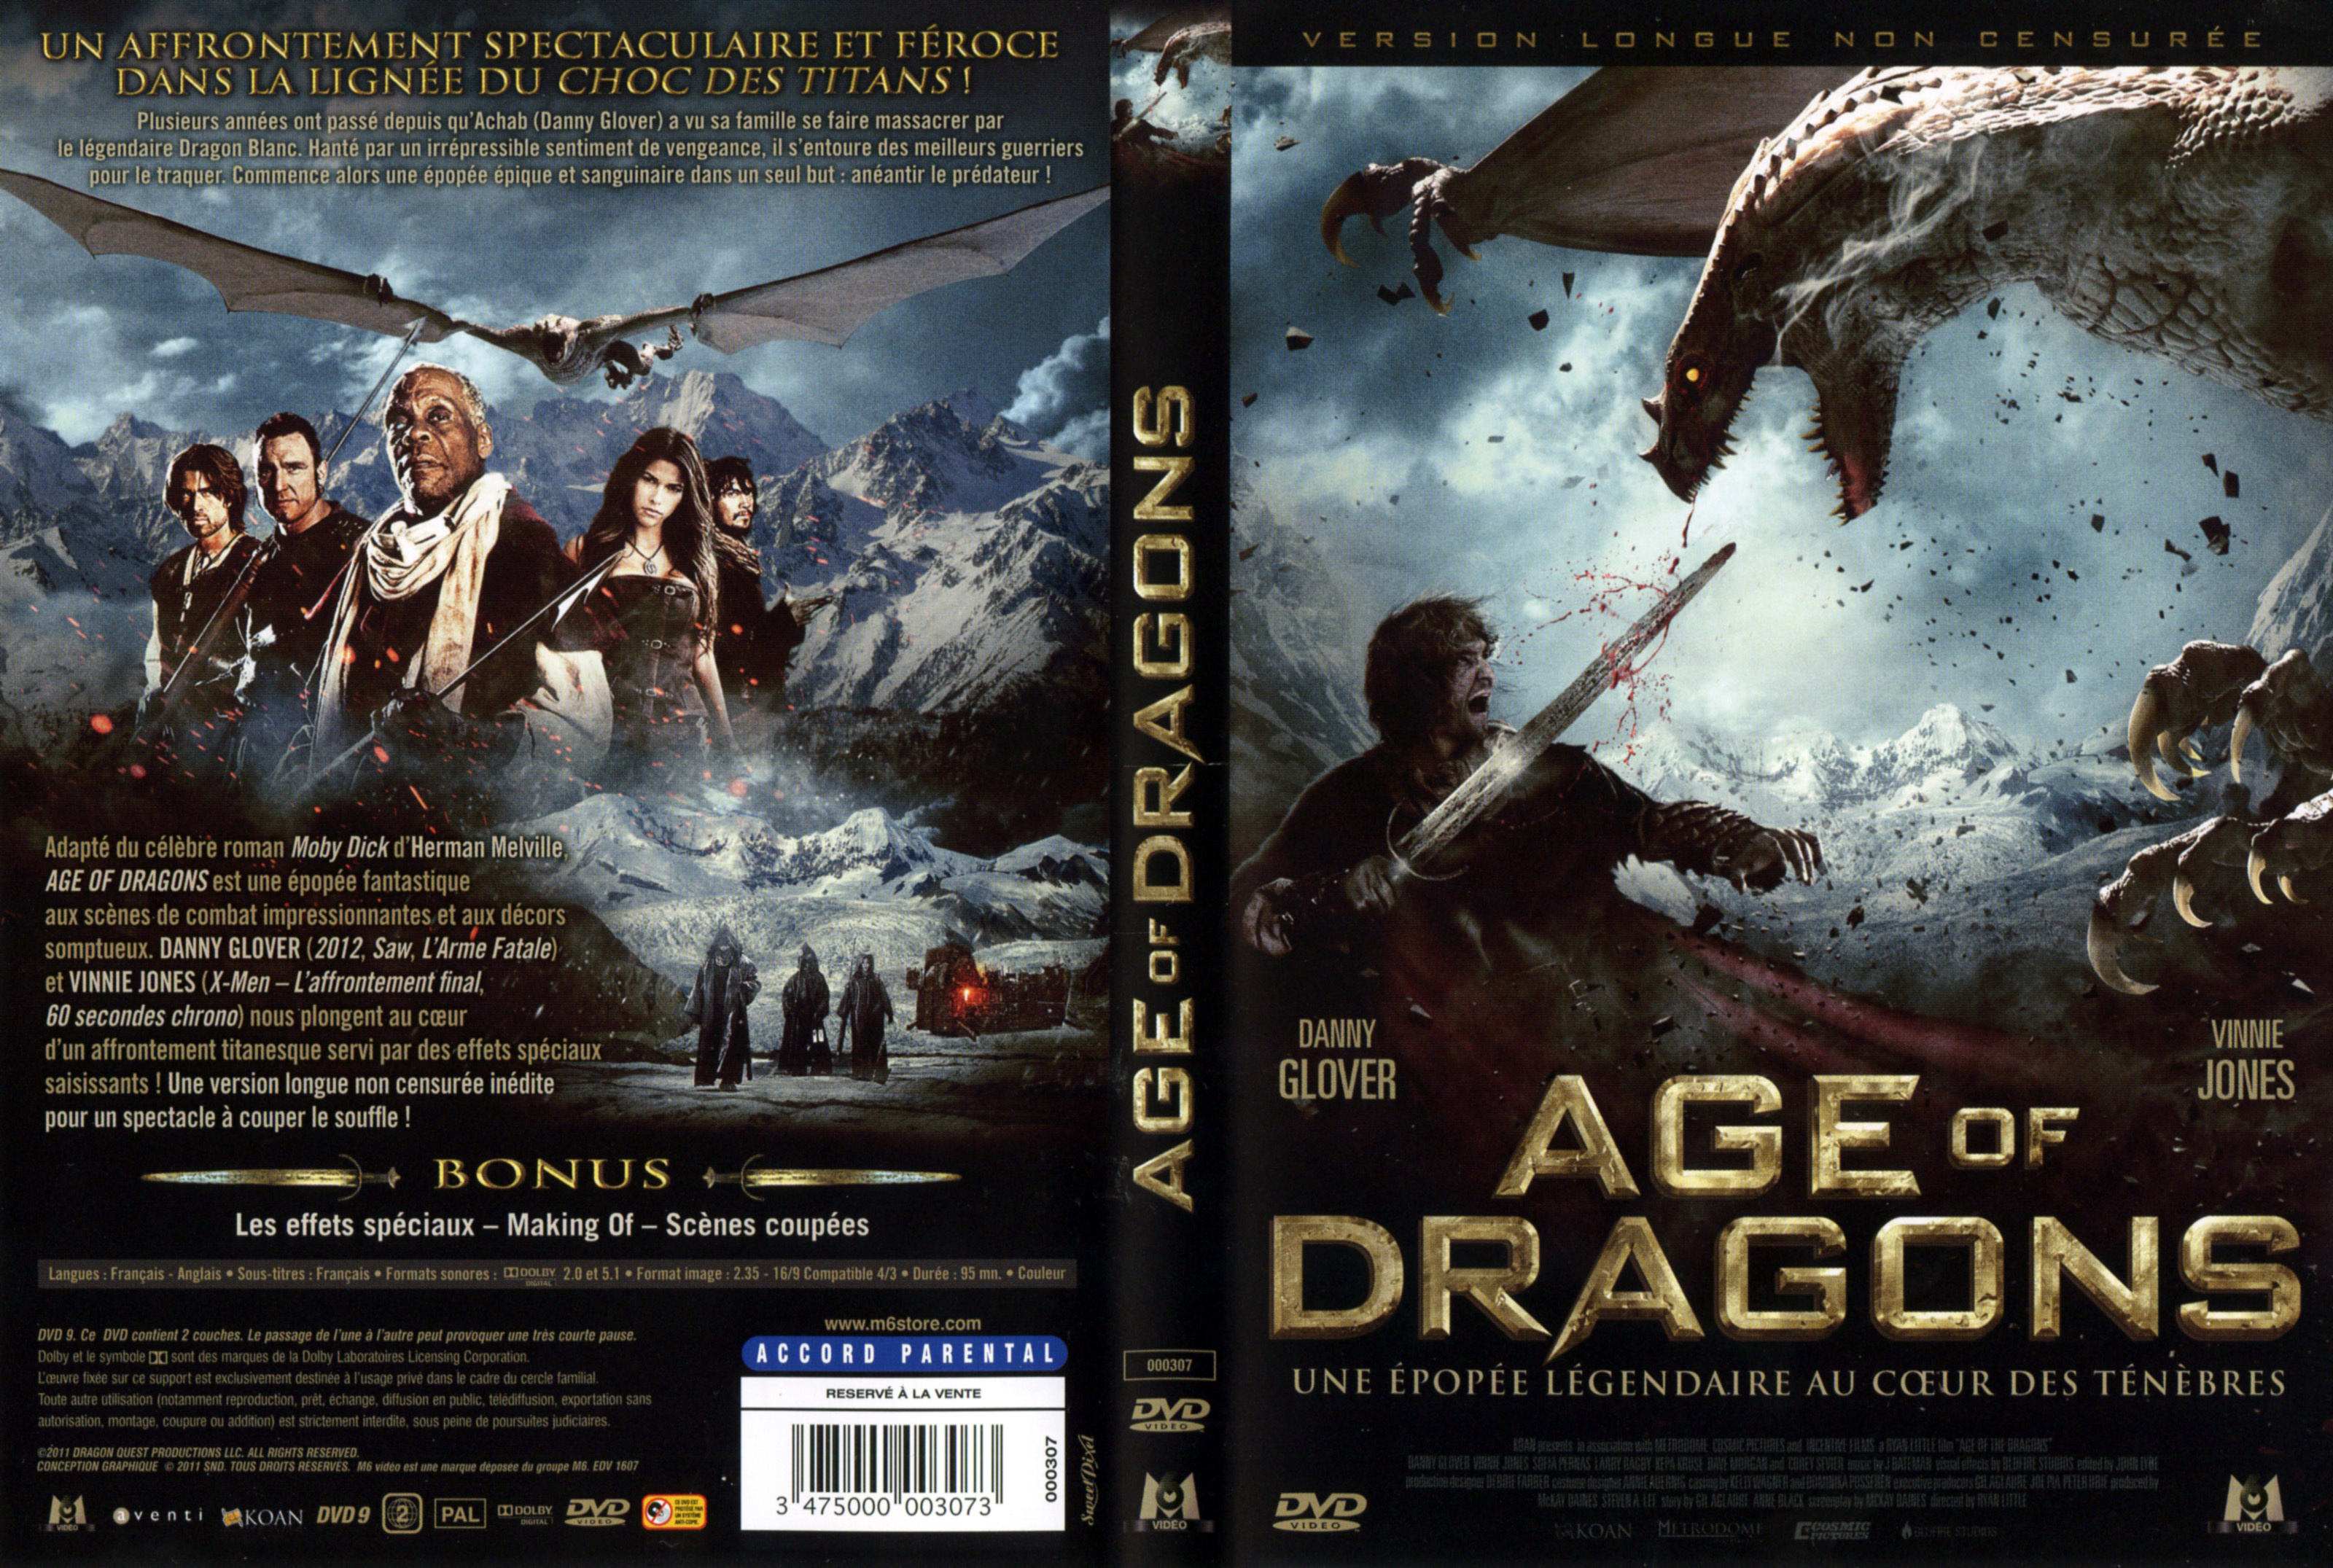 Jaquette DVD Age of dragons